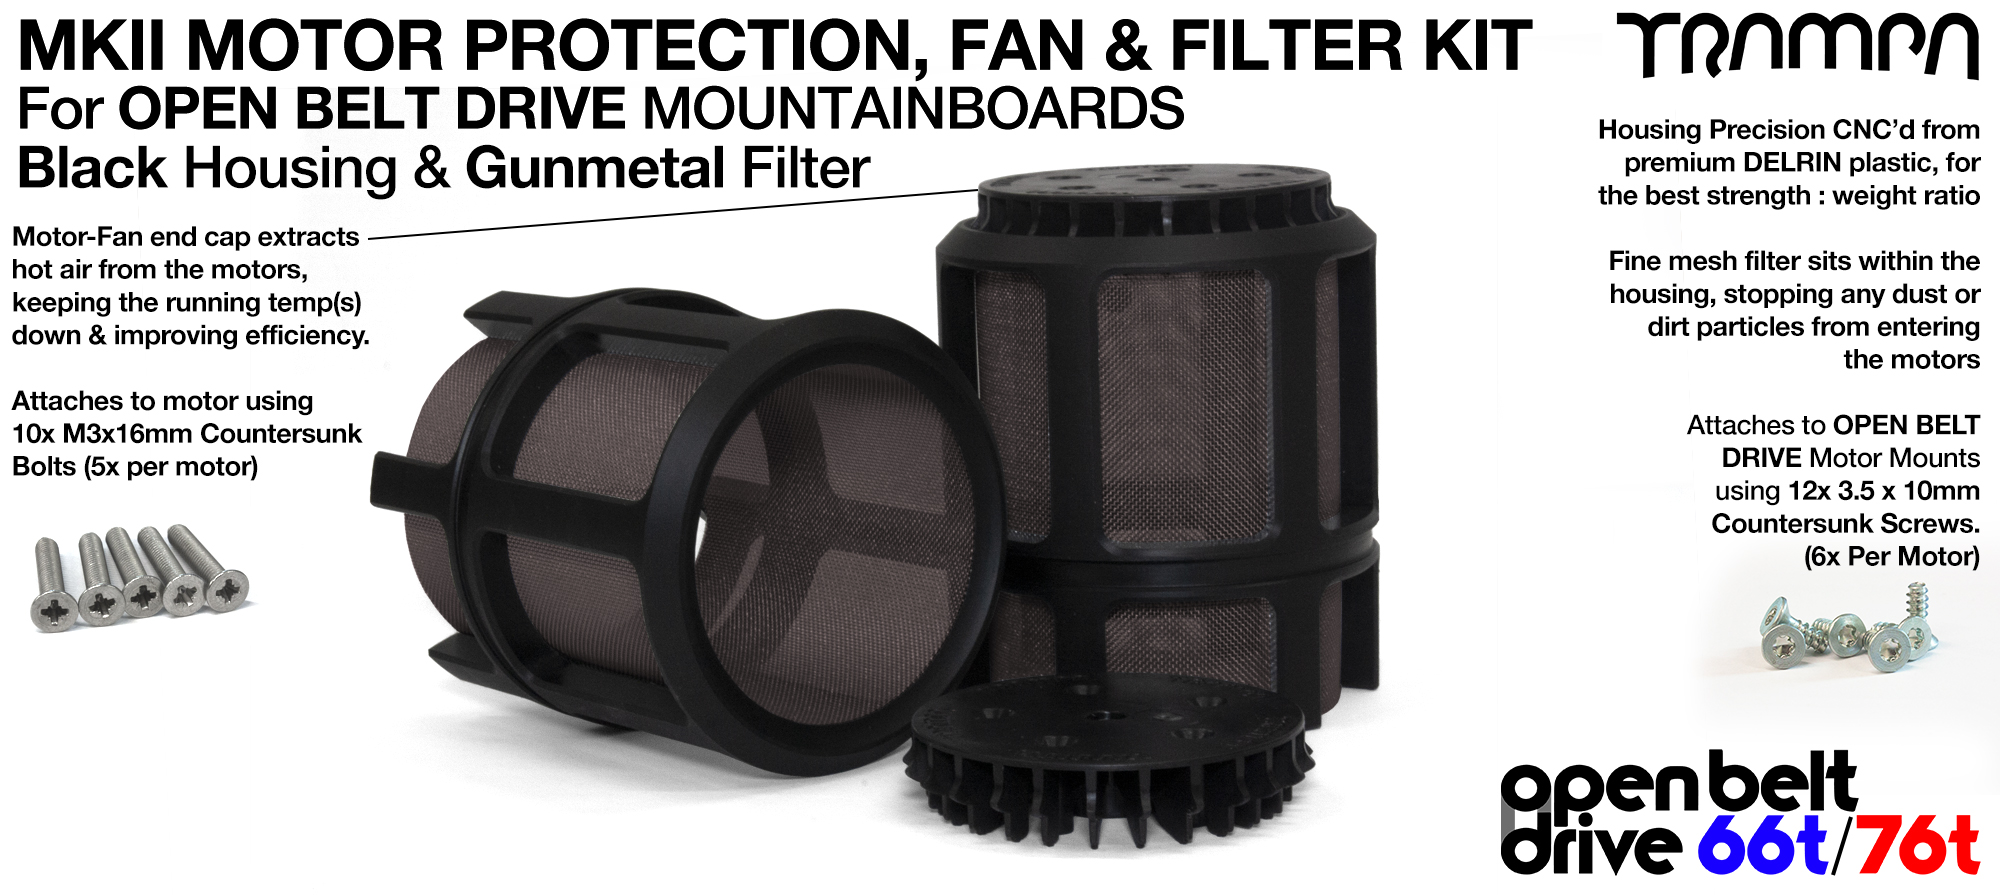 2x OBD MKII Motor protection Sleeve BLACK with GUNMETAL Filter